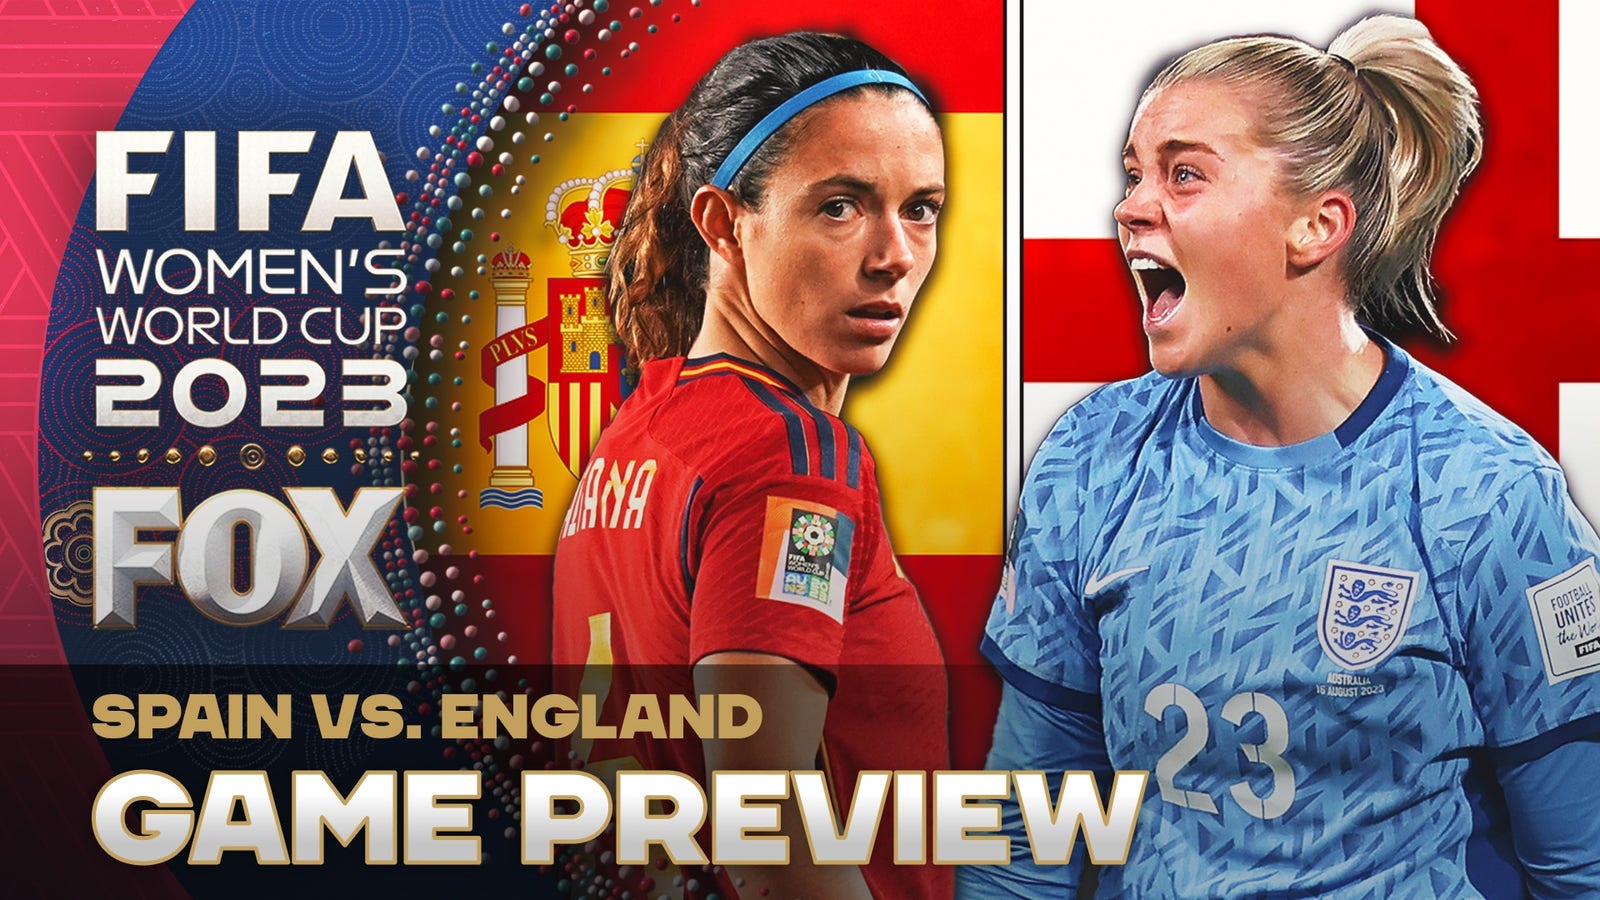 Women's World Cup final preview: Spain vs. England